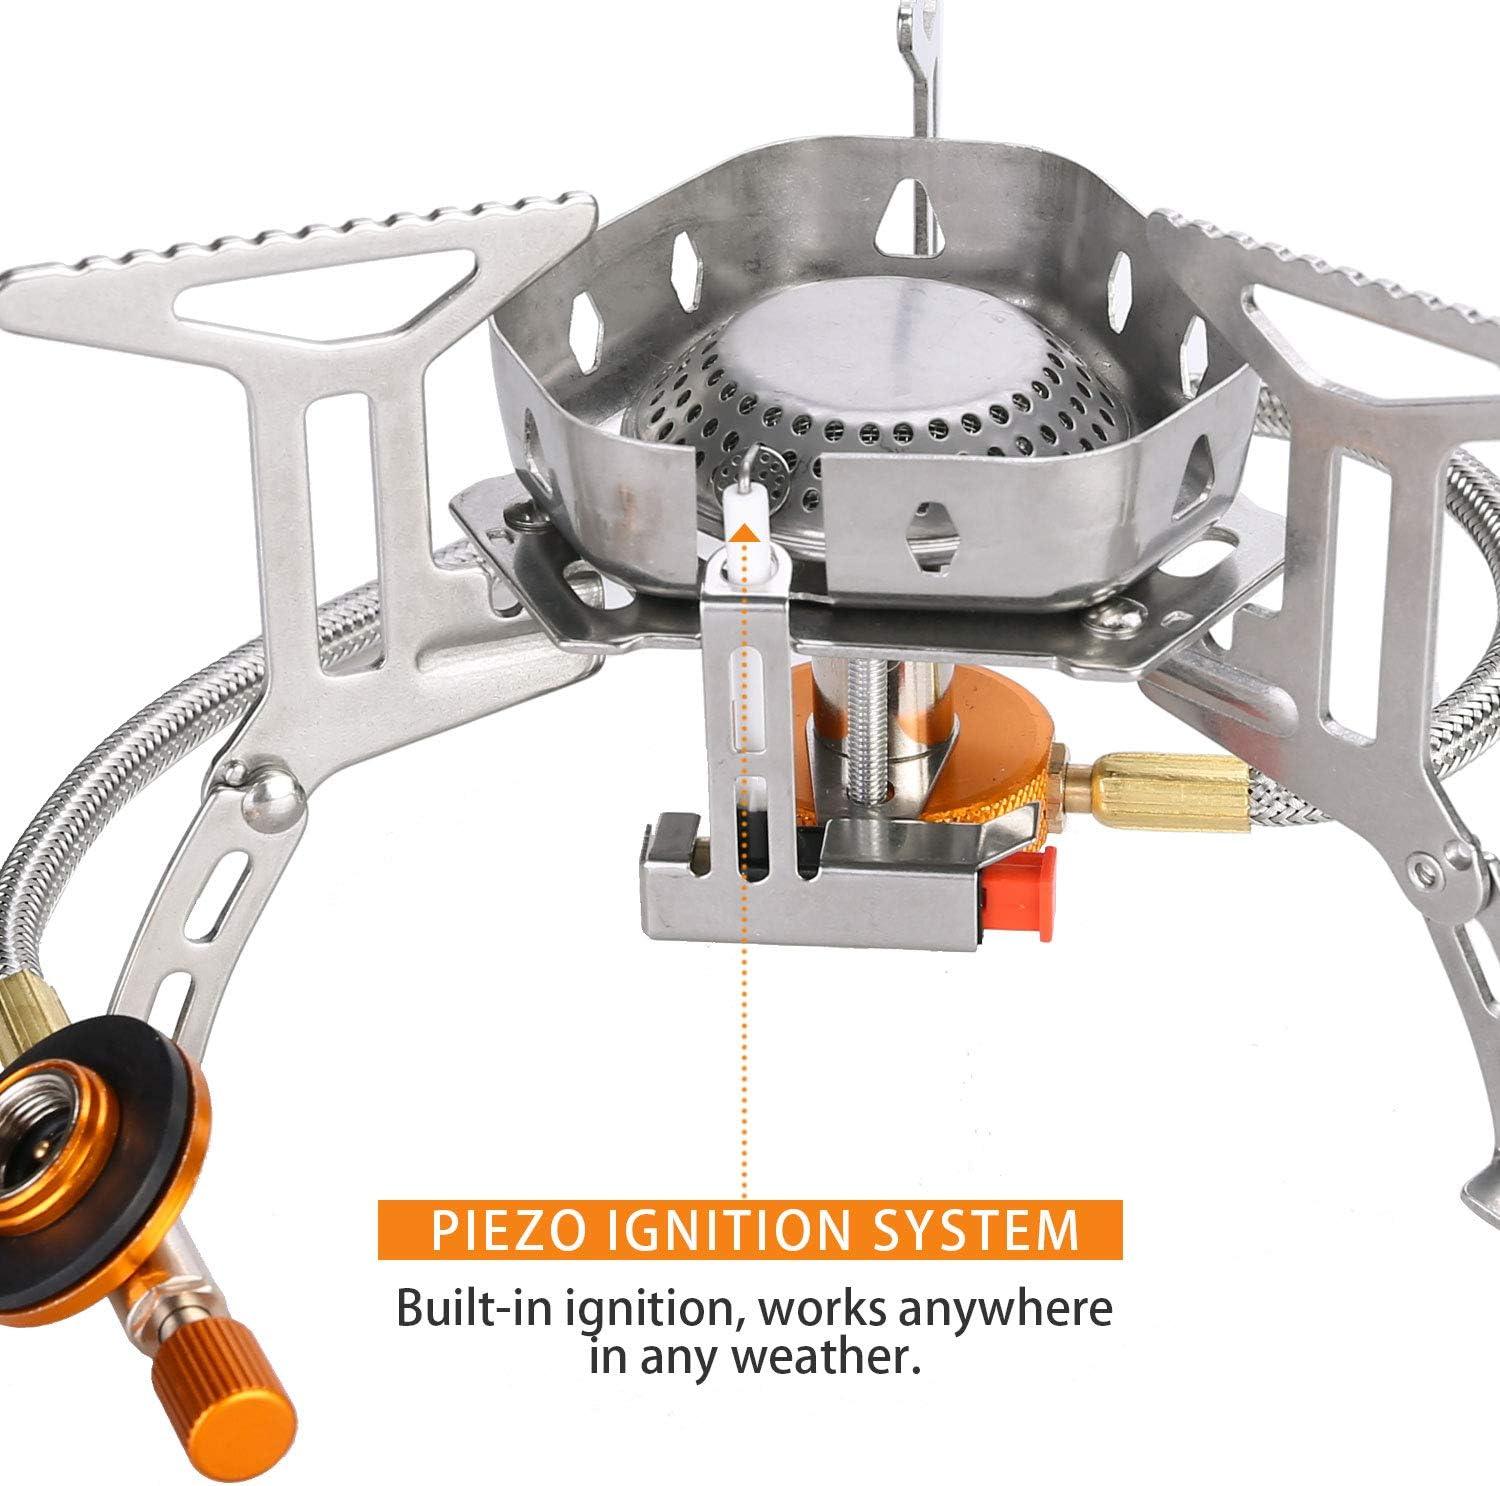 Odoland 3500W Windproof Camping Stove with Folding Windscreen, Canister Adapter - Massive Discounts